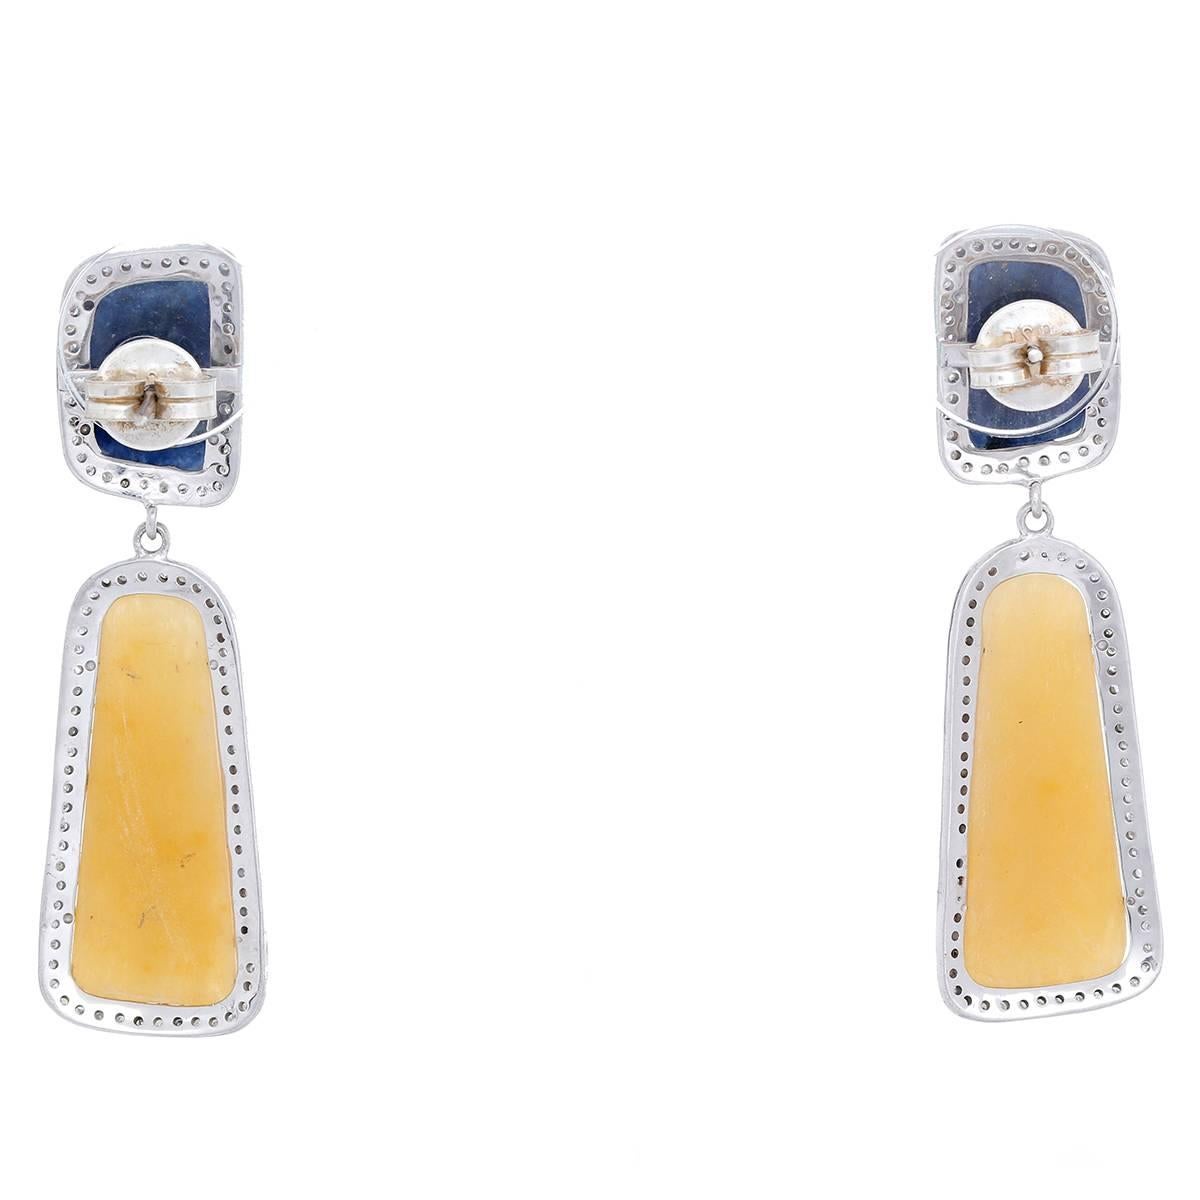 These bohemian inspired earrings feature sapphires and 0.95 ctw. of diamonds set in silver. Total weight is 16.7 grams. Earrings measure apx. 2-1/4 inches in length.